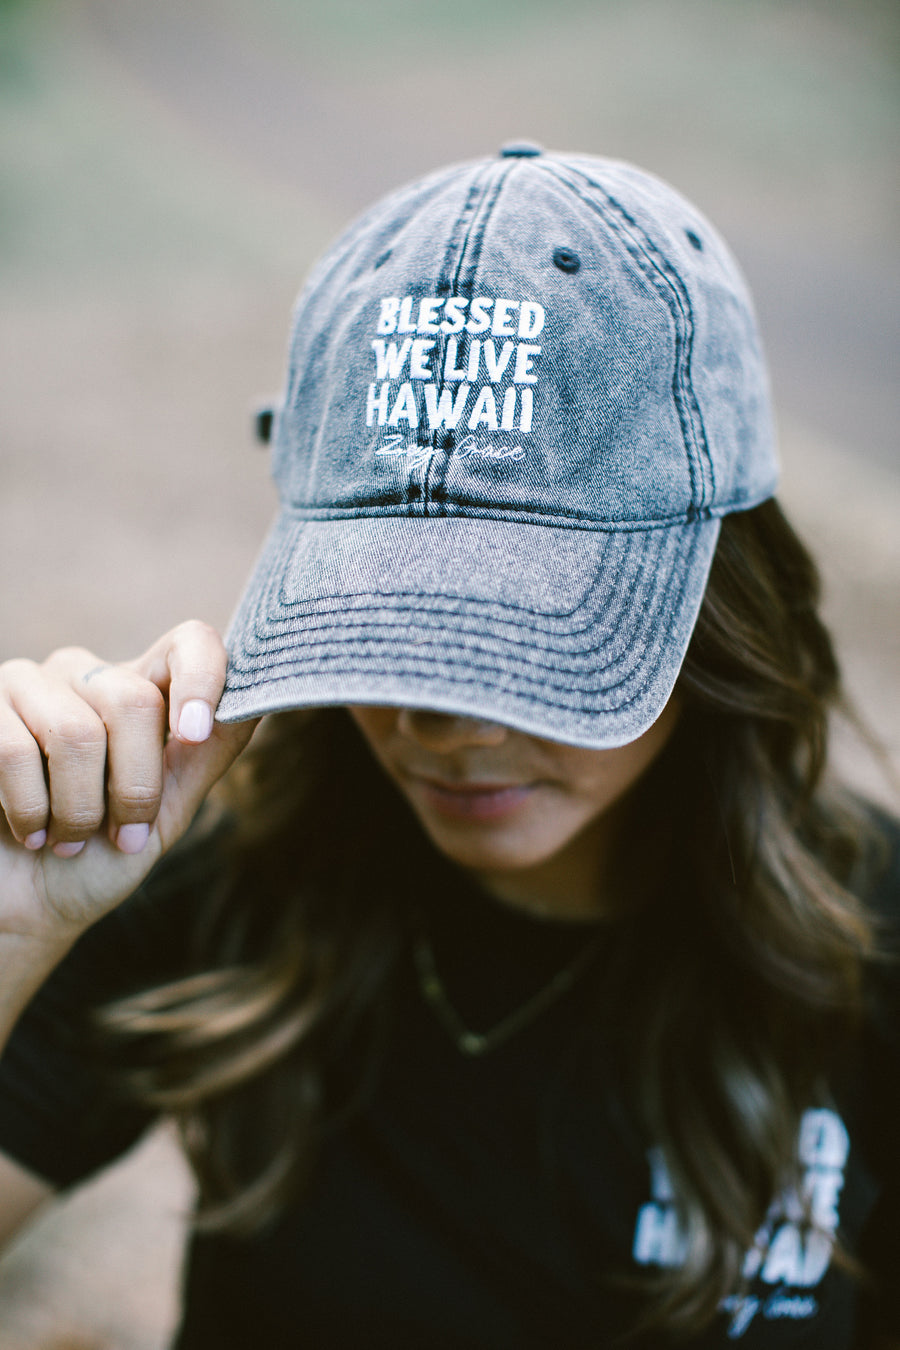 Hat- Blessed We Live Hawaii